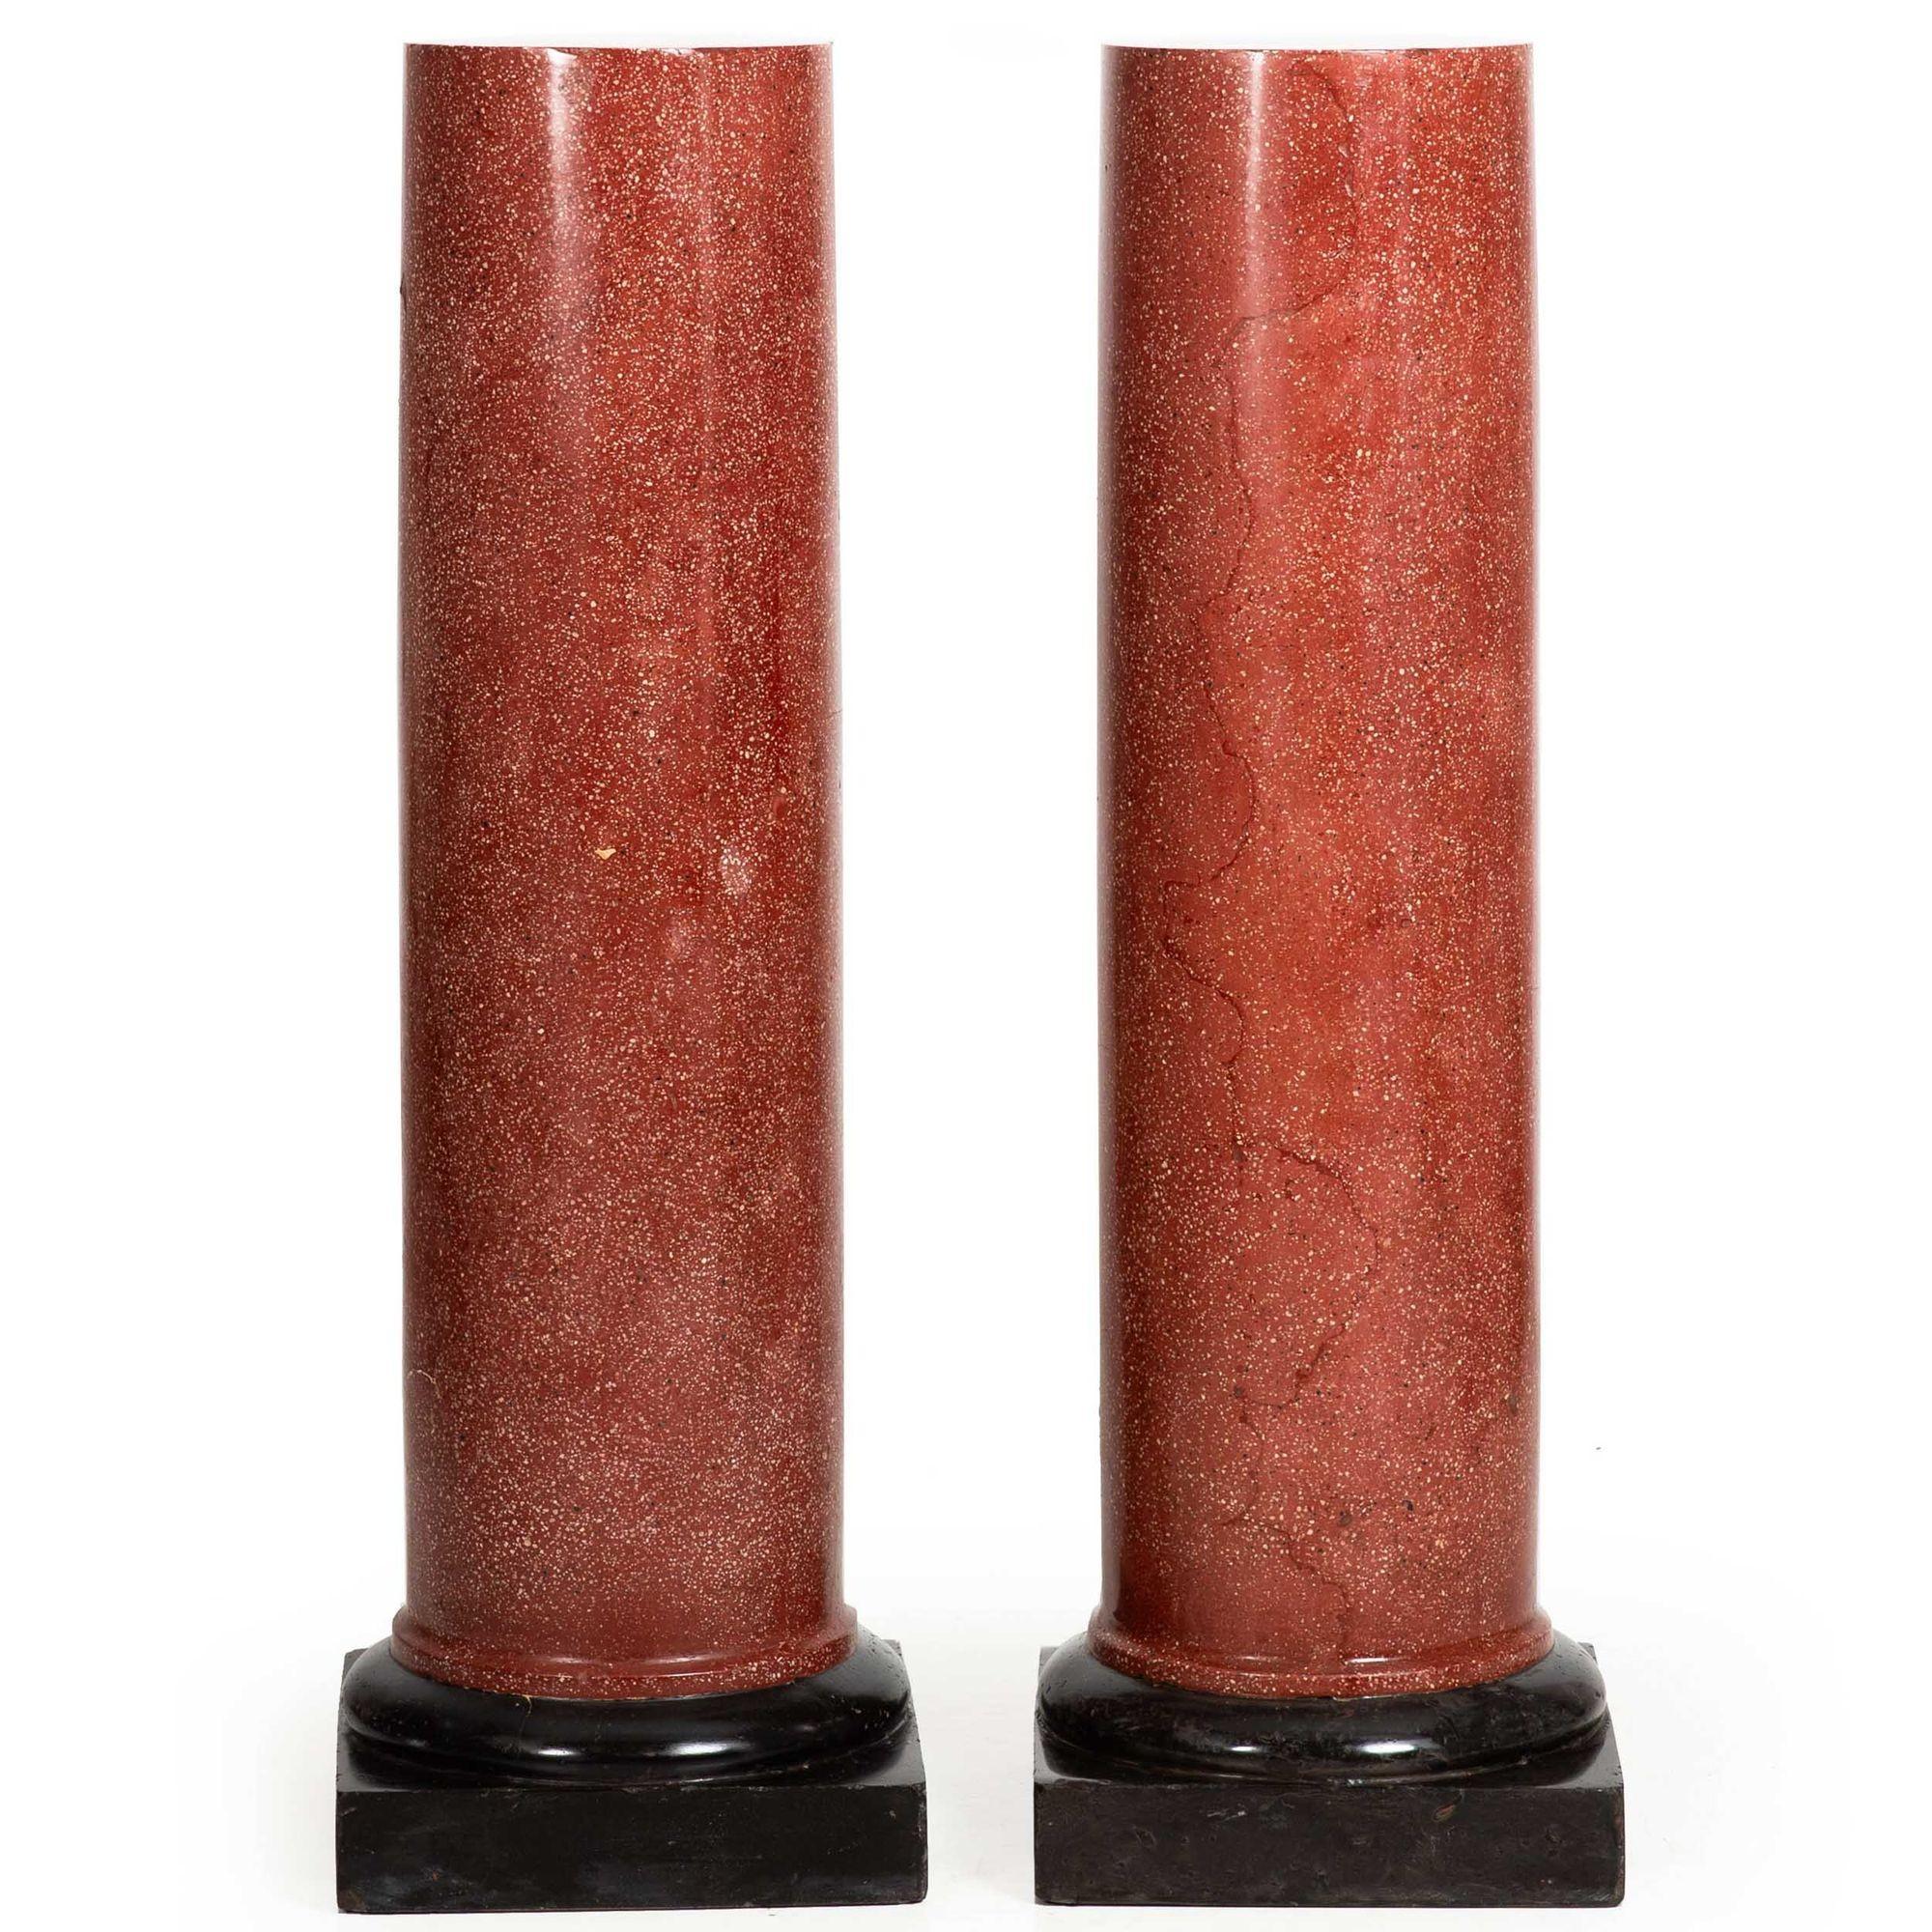 PAIR OF NEOCLASSICAL SIMULATED-PORPHYRY SCAGLIOLA PEDESTAL COLUMNS
Probably Italian, circa late 19th century
Item # 403HRY18X

This fine pair of Neoclassical columns are exquisite examples of the scagliola technique, a difficult-to-master artistic